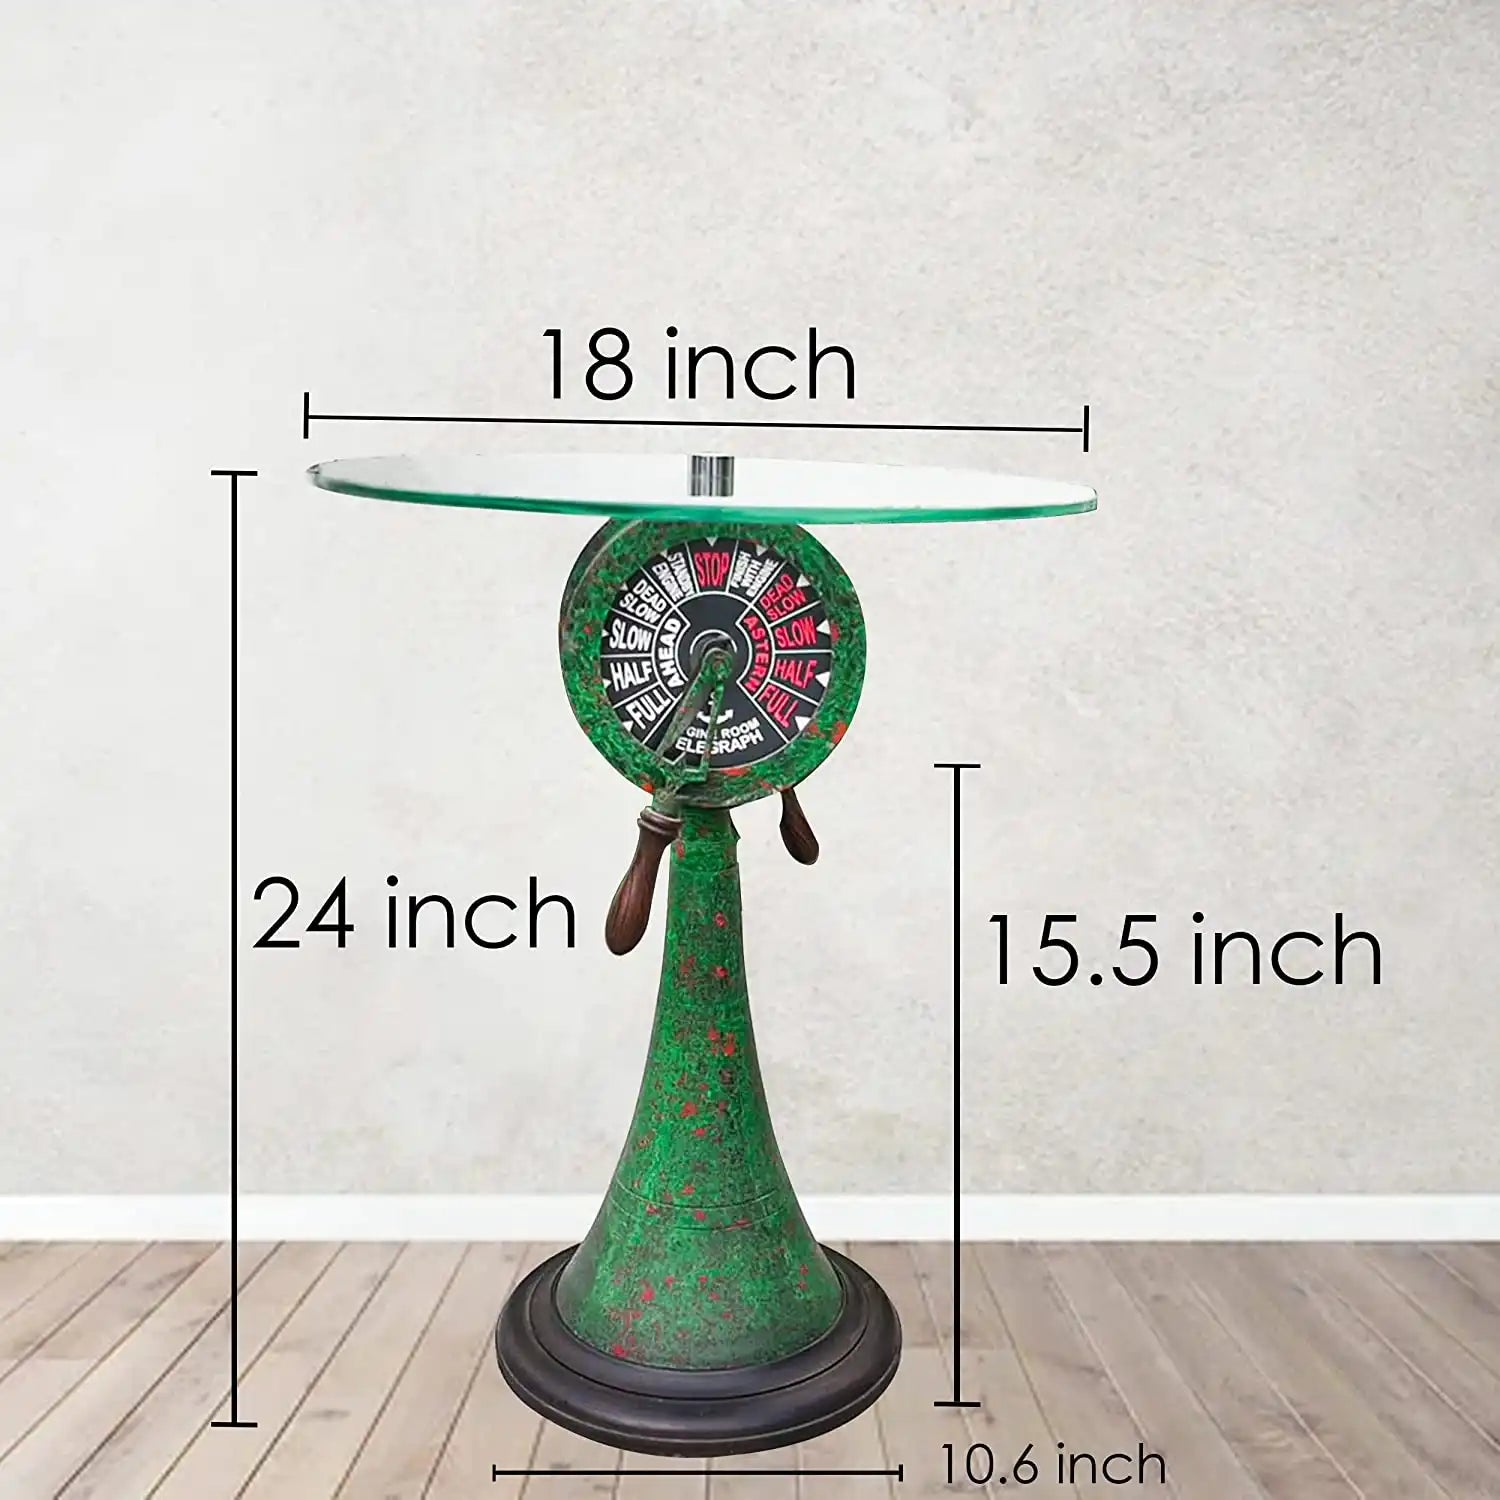 Antique Green Telegraph Table for Home Decor by Porthomall | Unique Style Tables for unique decorative choices and accent in home